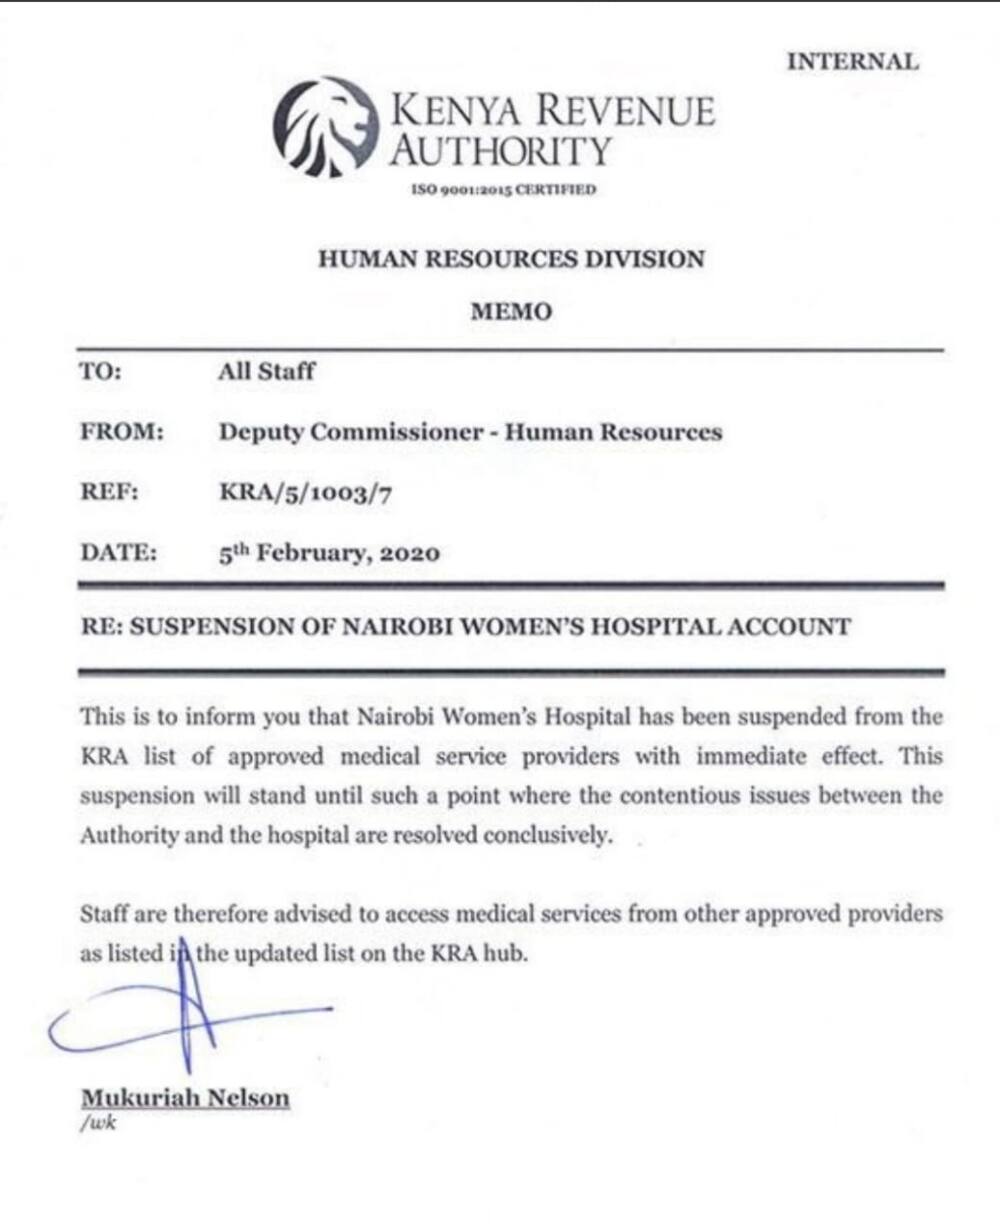 KRA suspends Nairobi Women's Hospital from its list of service providers